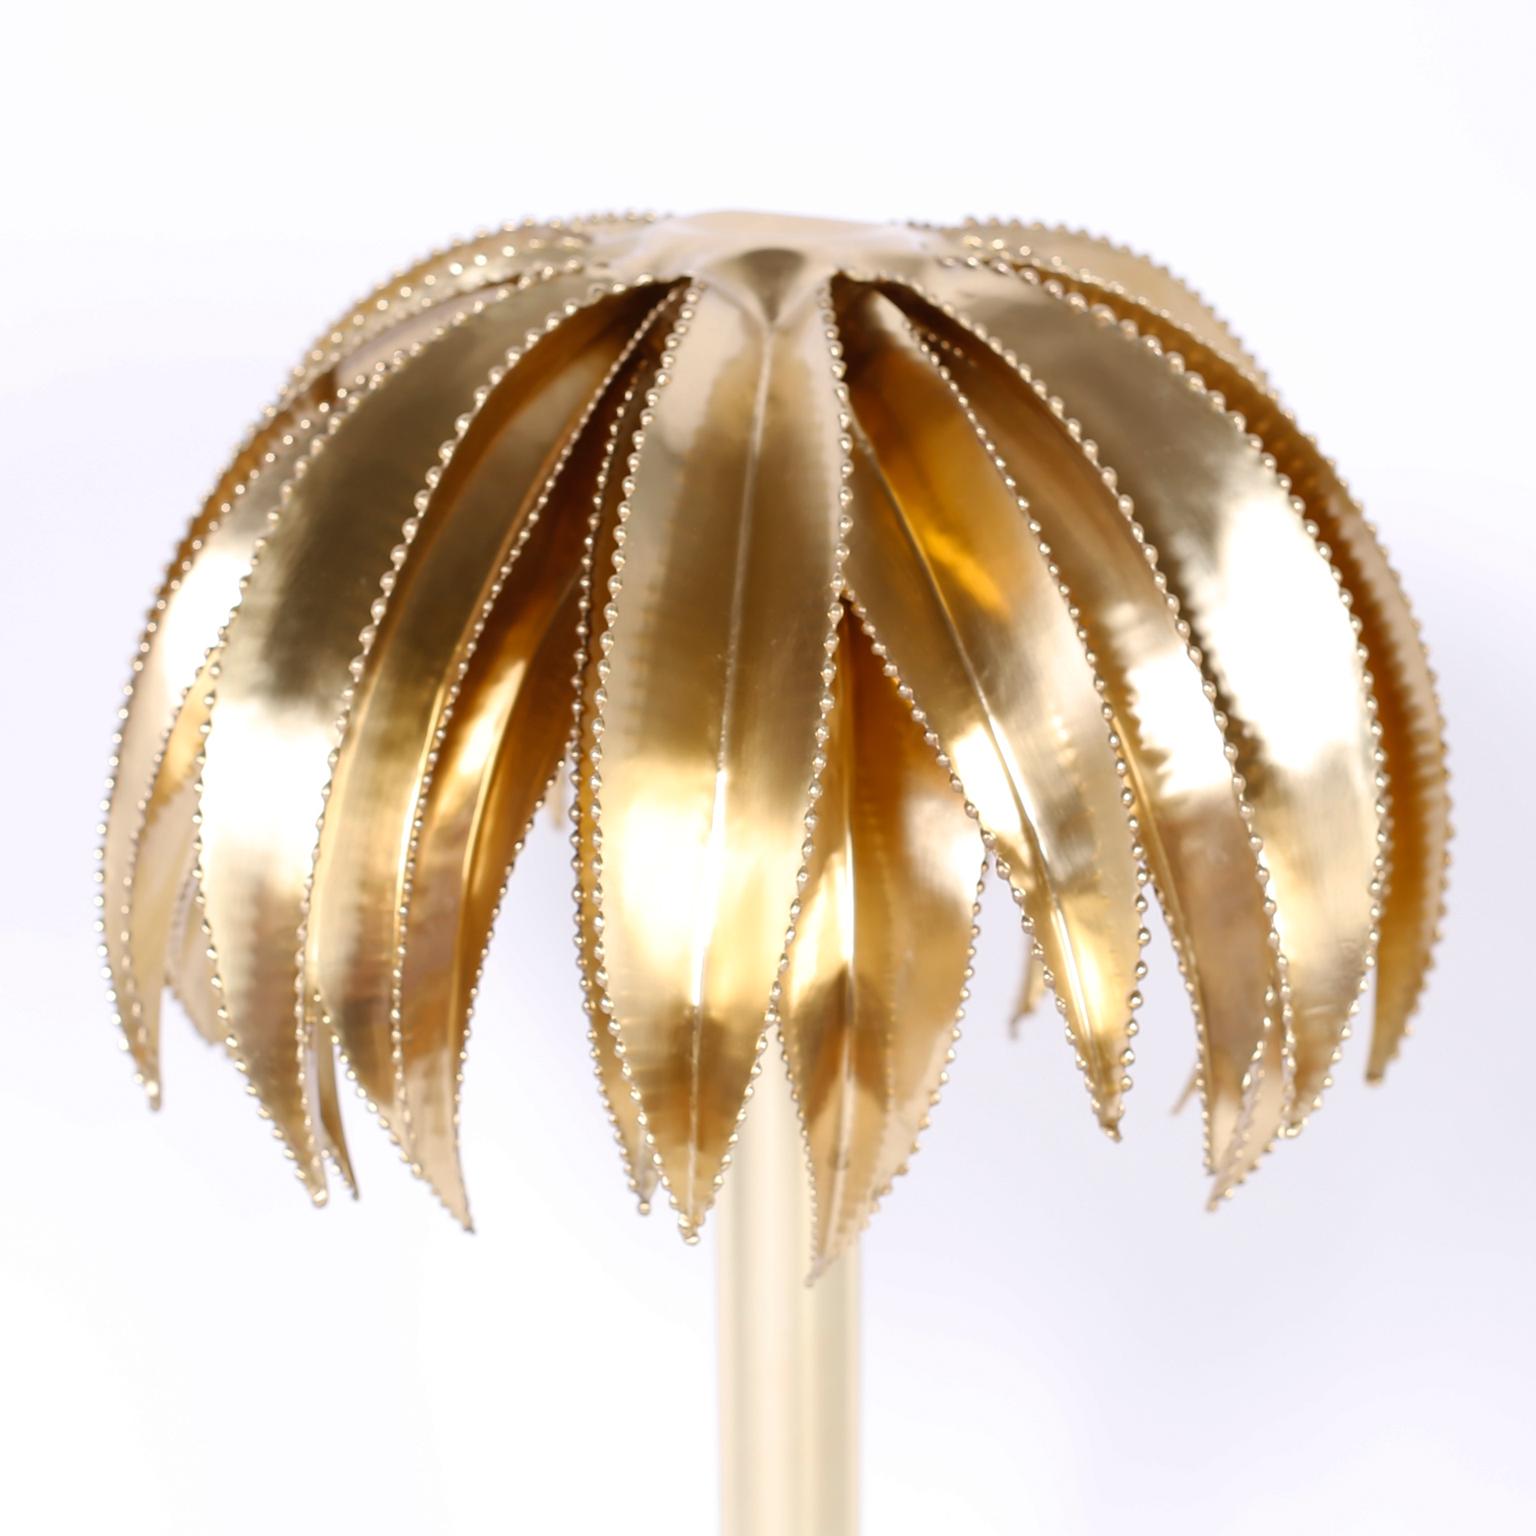 Midcentury brass palm tree sculpture with Brutalist style cerated edges, sleek stylized trunk, and presented on a Lucite base.